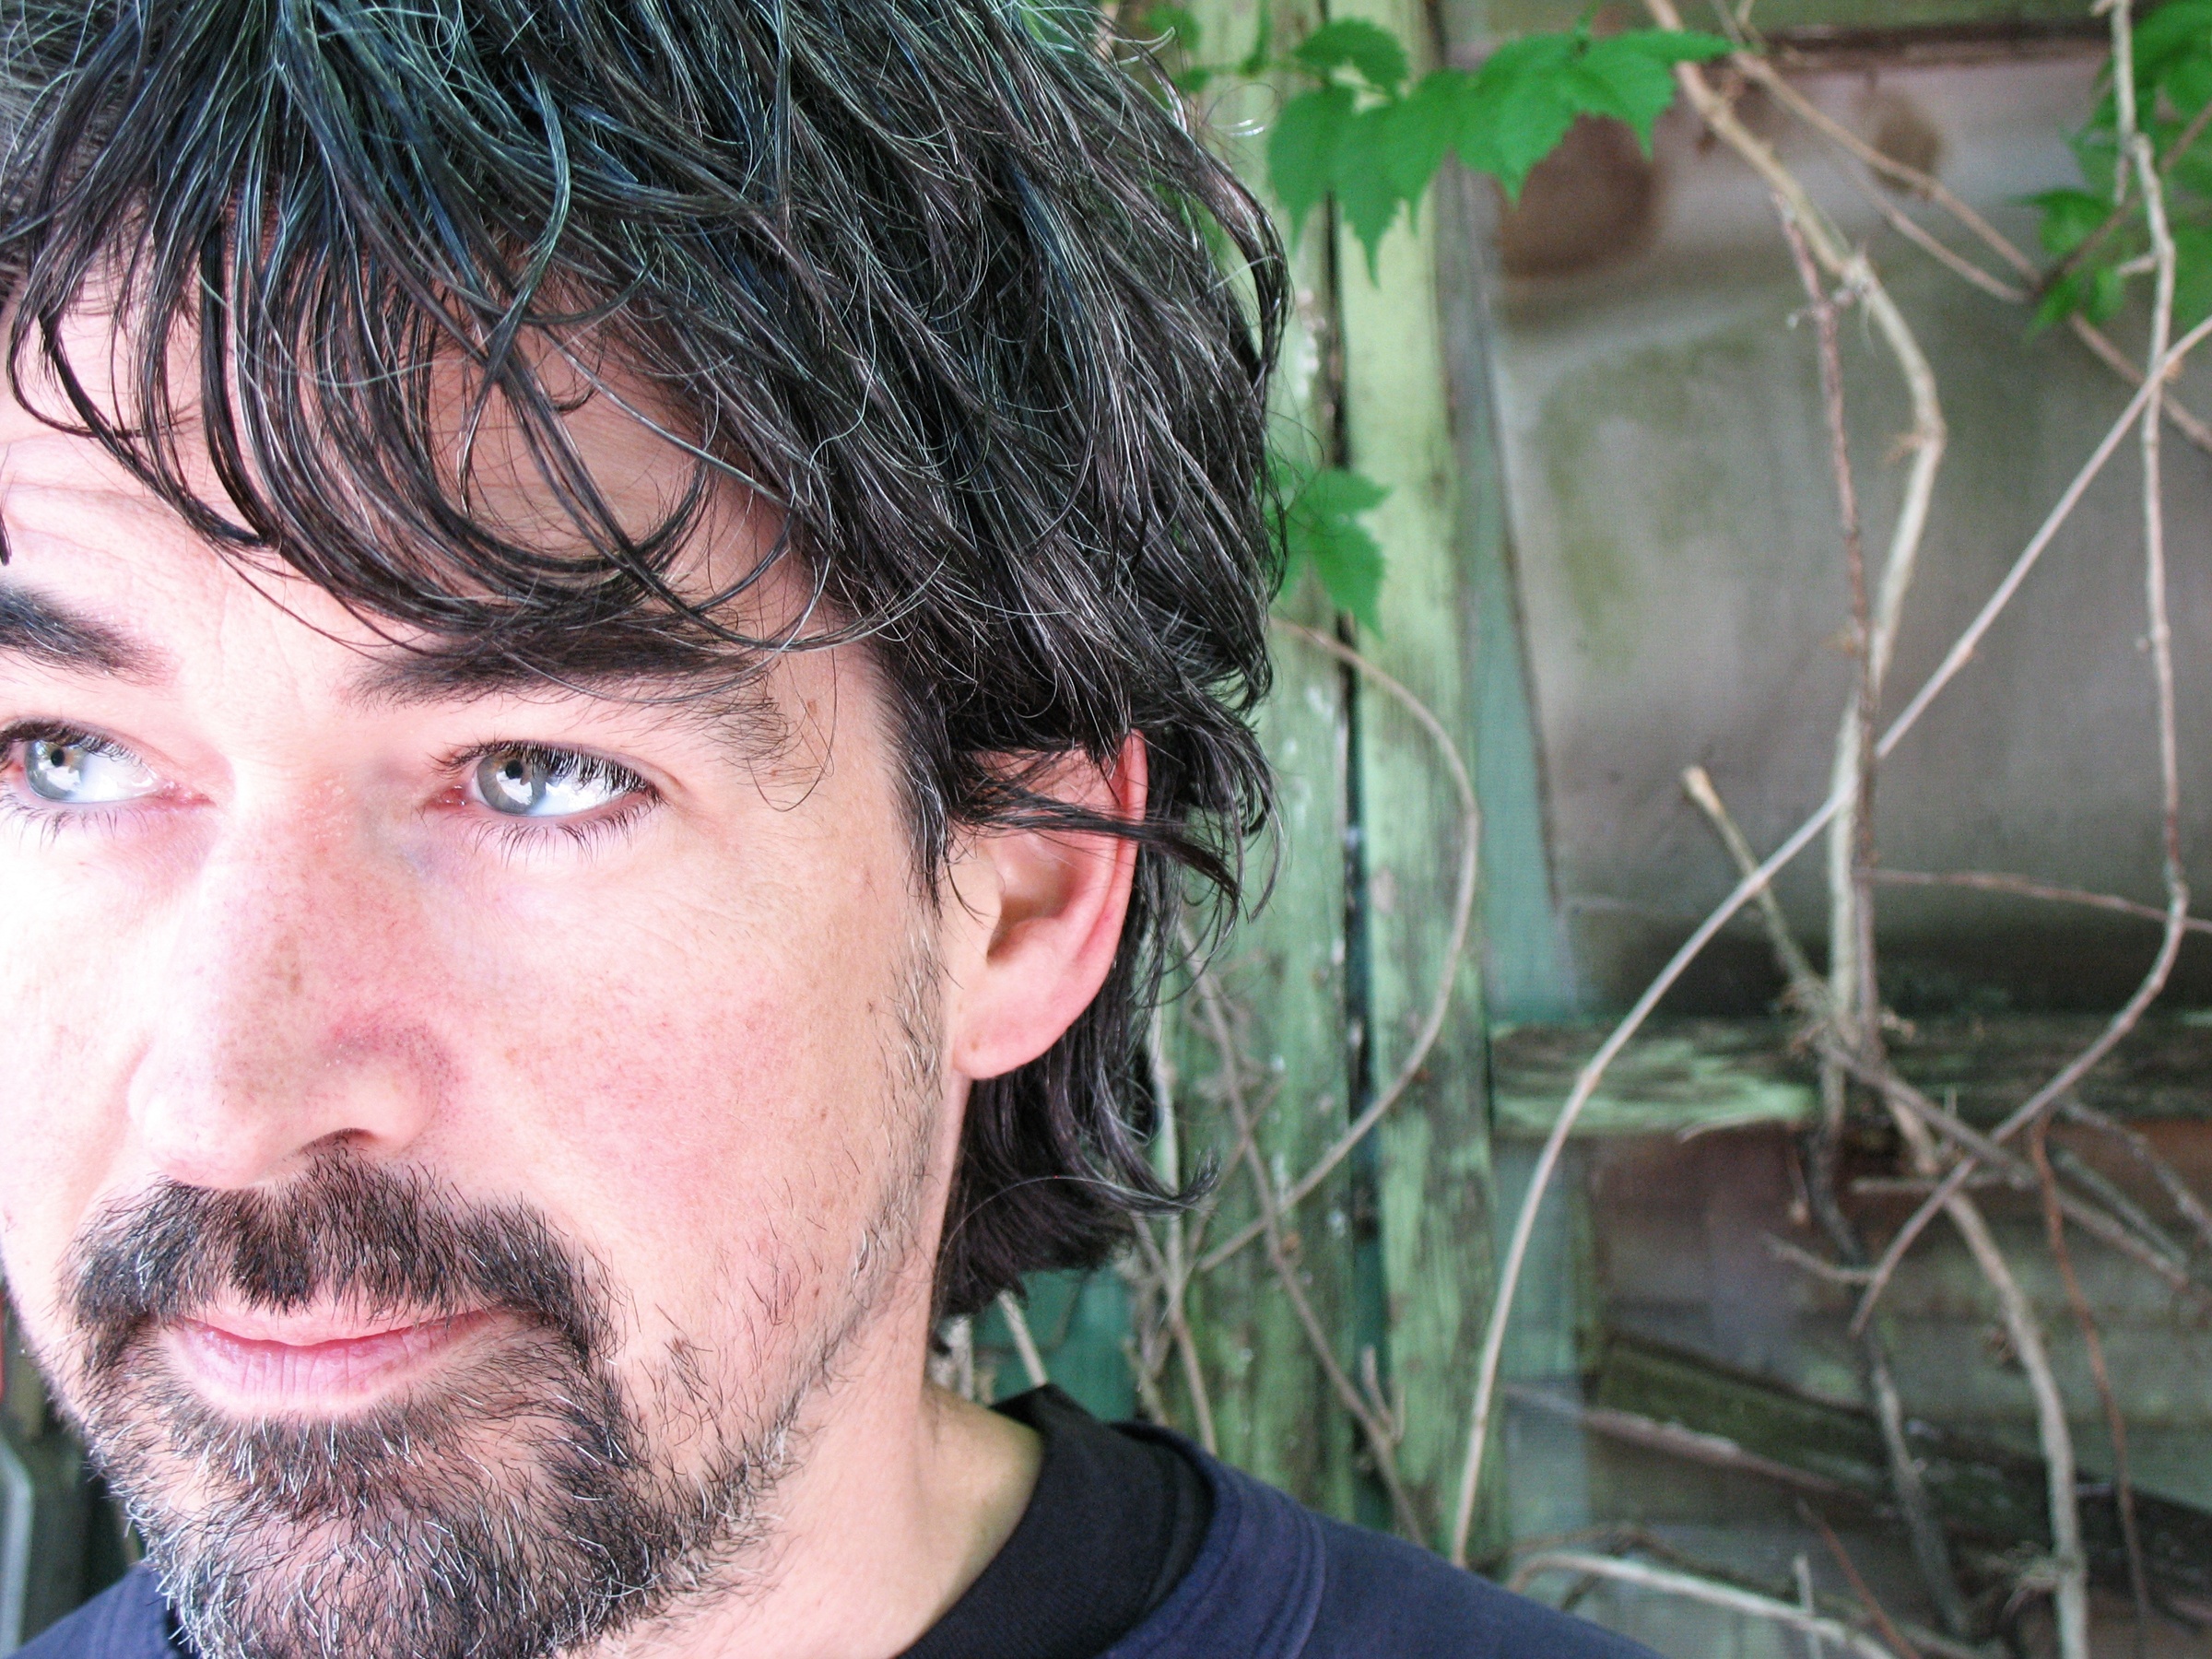 NEW VISION- Singer Slaid Cleaves joins Michael O’Conner for a performance at The Matchbox Theatre Oct. 29.